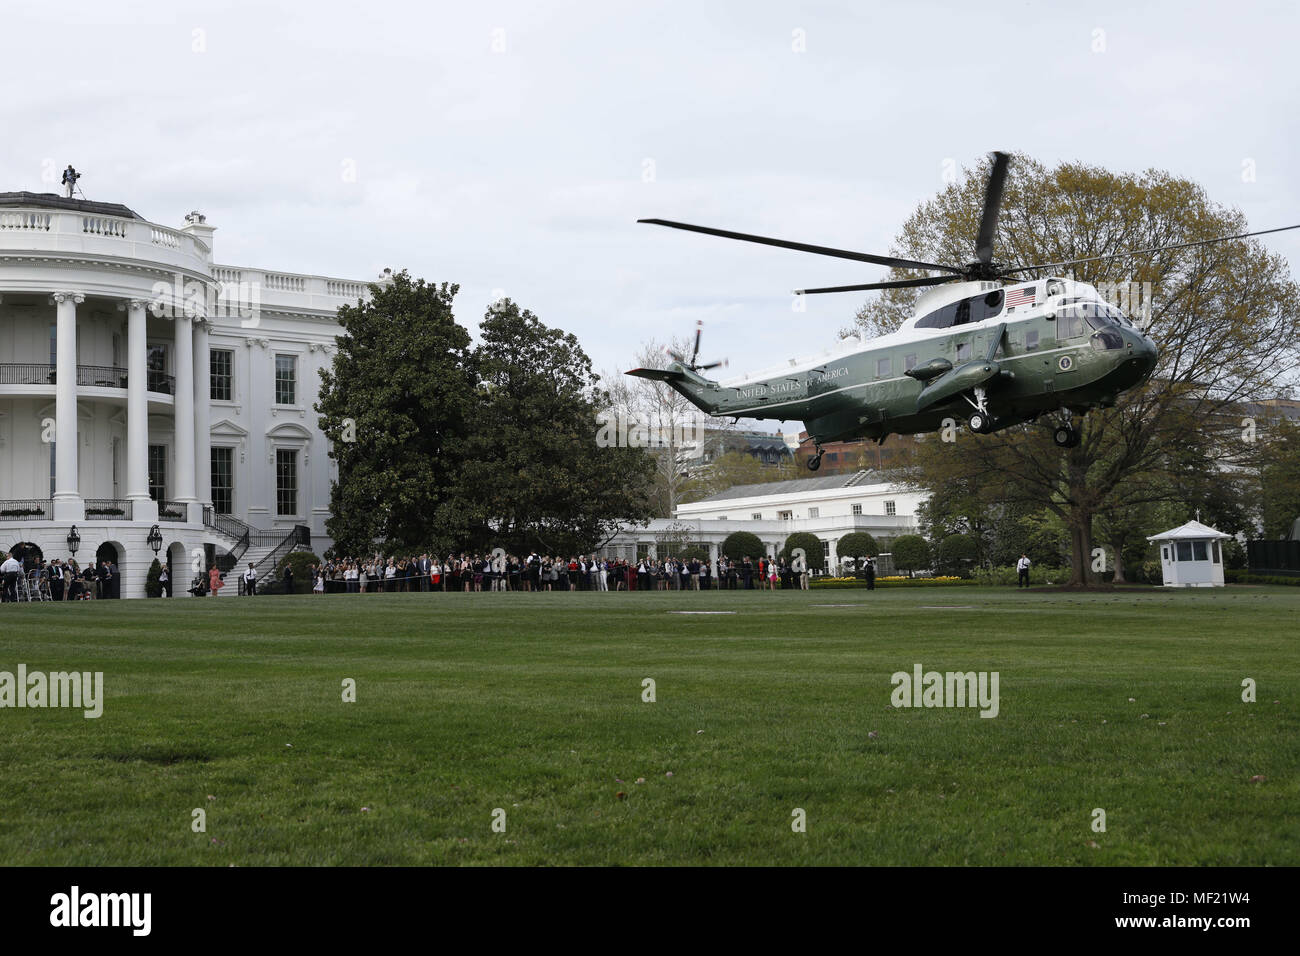 Washington, District of Columbia, USA. 23rd Apr, 2018. Marine One helicopter with U.S. President Donald Trump, France's president Emmanuel Macron and First Ladies Melania Trump and Brigitte Macron on board departs on the South Lawn of the White House in Washington, DC, U.S., on Monday, April 23, 2018. As Macron arrives for the first state visit of Trump's presidency, the U.S. leader is threatening to upend the global trading system with tariffs on China, maybe Europe too. Credit: Yuri Gripas/Pool via CNP Credit: Yuri Gripas/CNP/ZUMA Wire/Alamy Live News Stock Photo